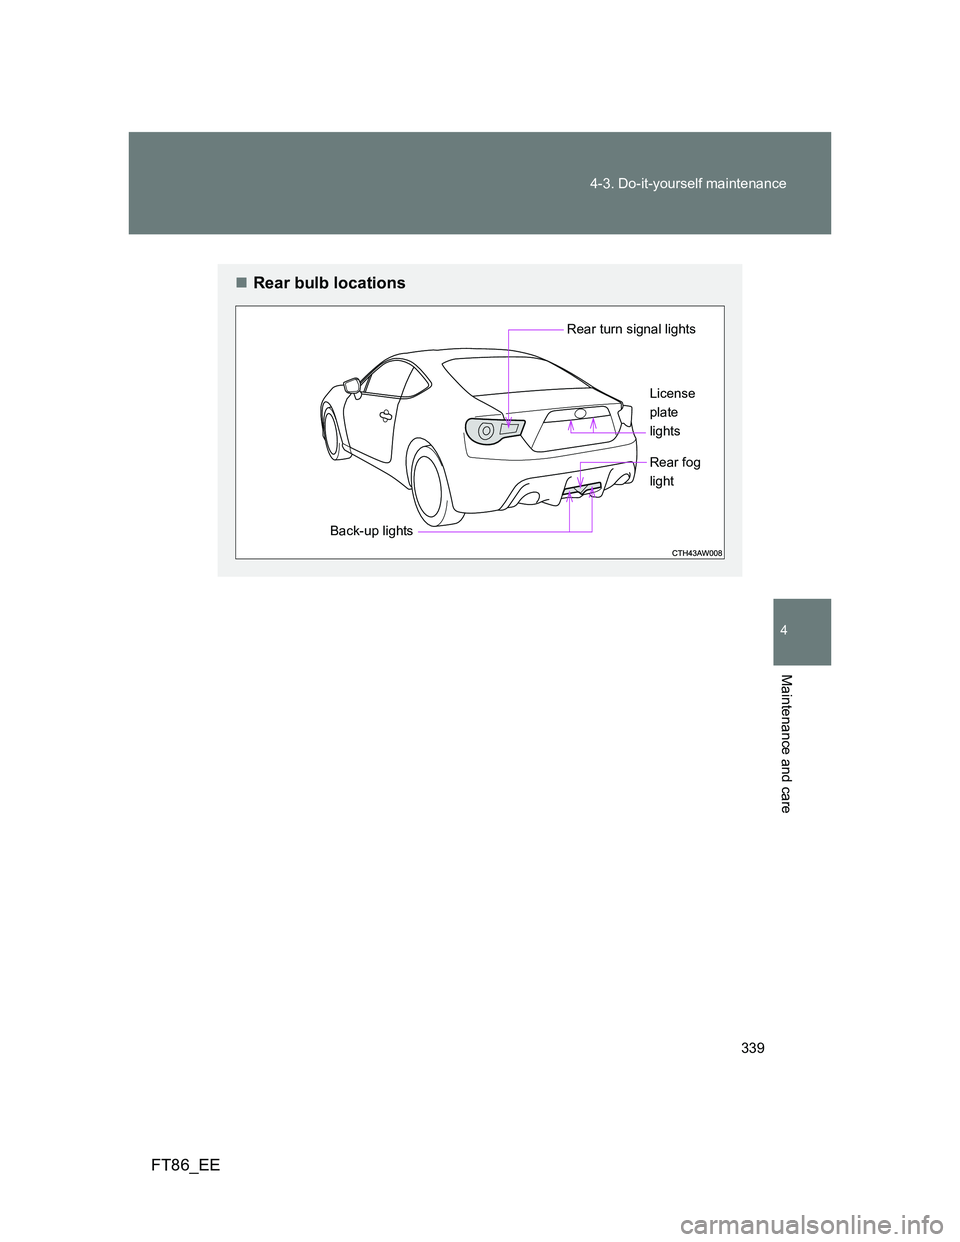 TOYOTA GT86 2014  Owners Manual (in English) 339 4-3. Do-it-yourself maintenance
4
Maintenance and care
FT86_EE
Rear bulb locations
Rear turn signal lights
Back-up lightsLicense
plate
lights
Rear fog 
light 